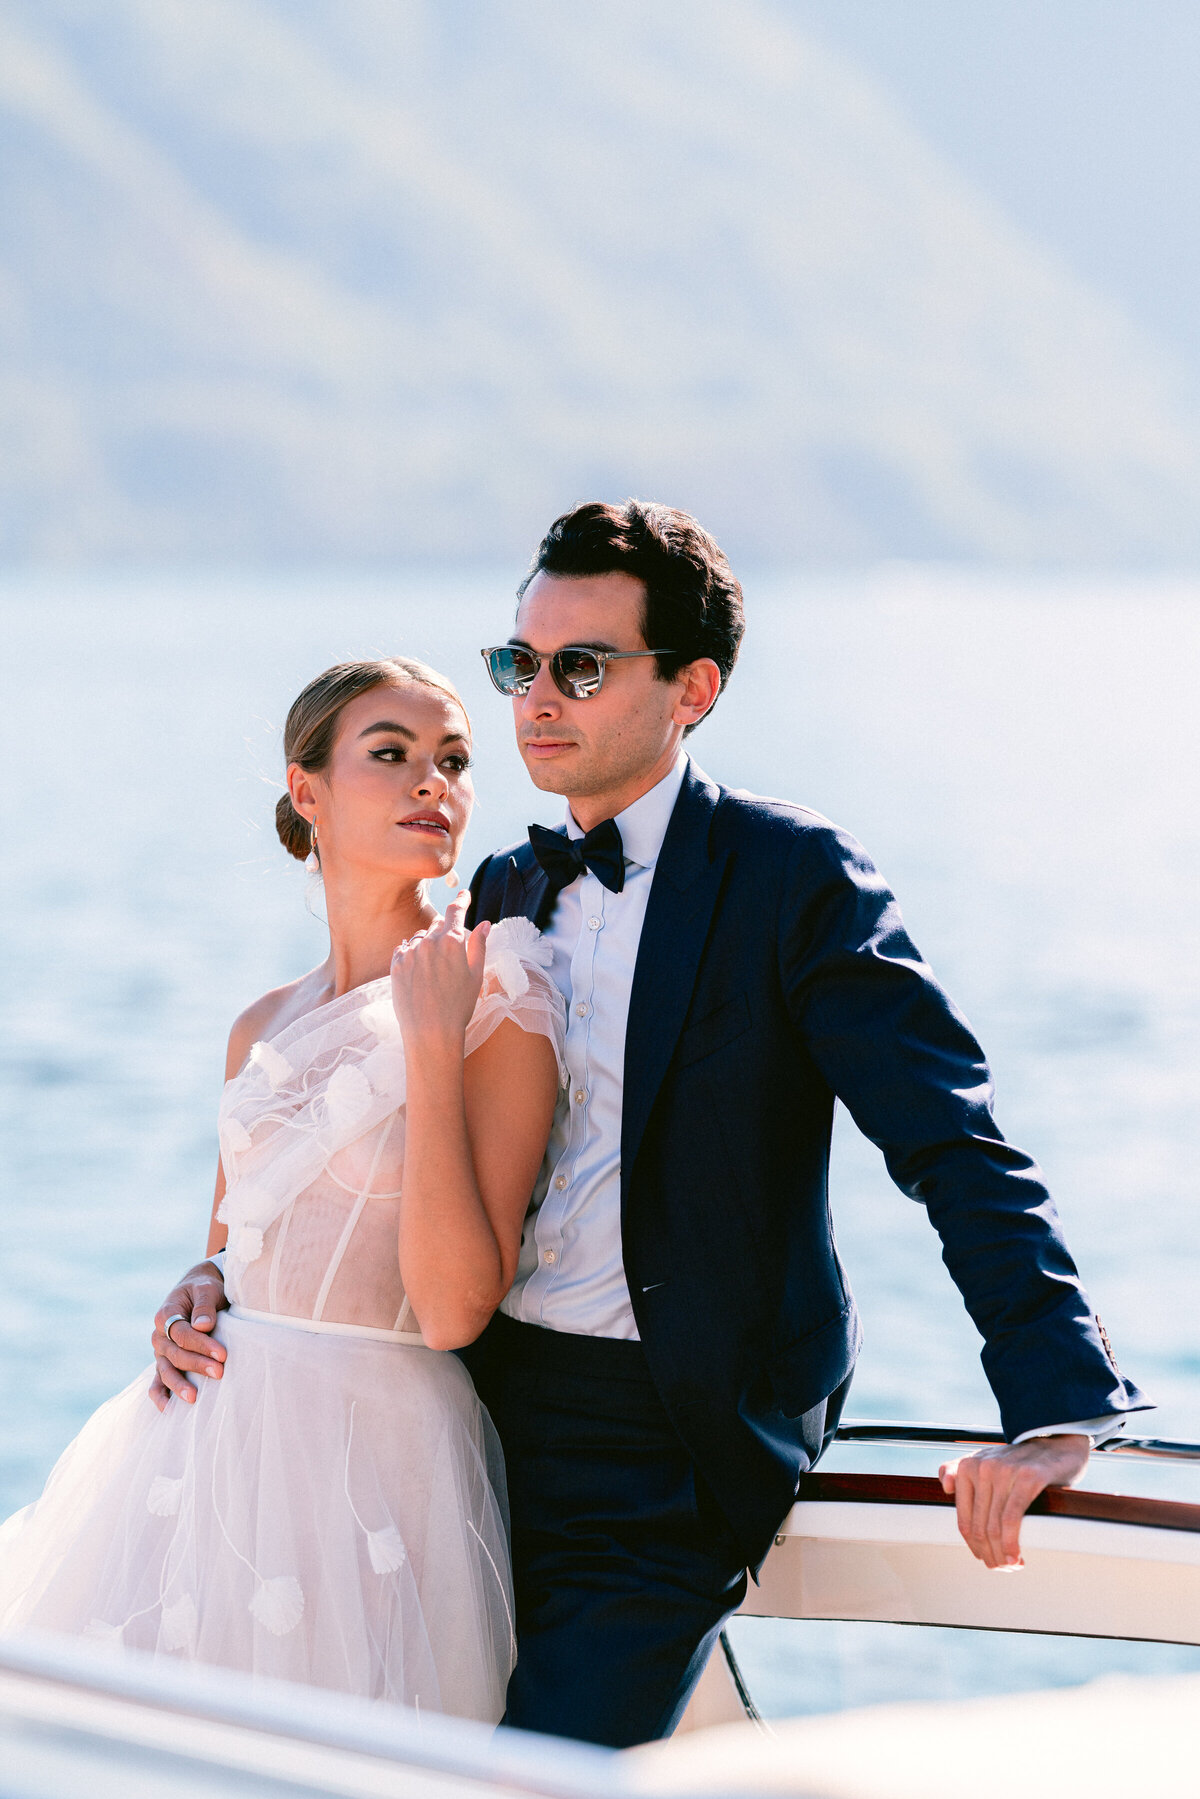 Bride and groom on board a private boat on lake como, italy